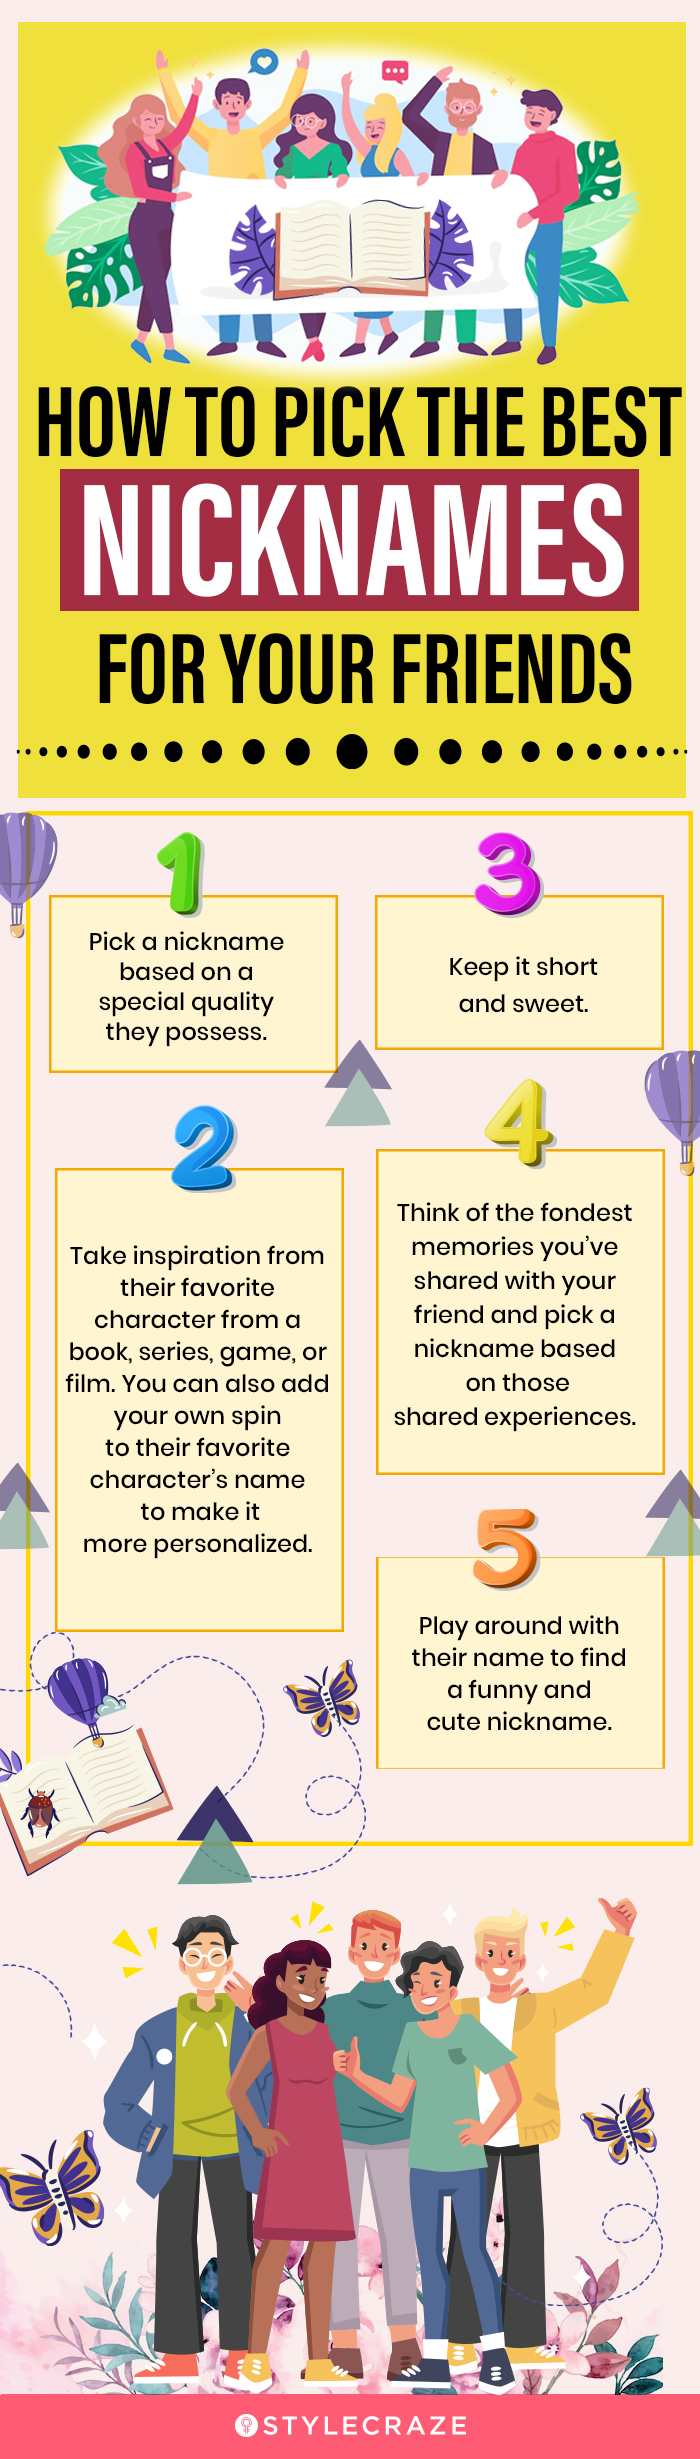 how to pick the best nicknames for your friends [infographic]